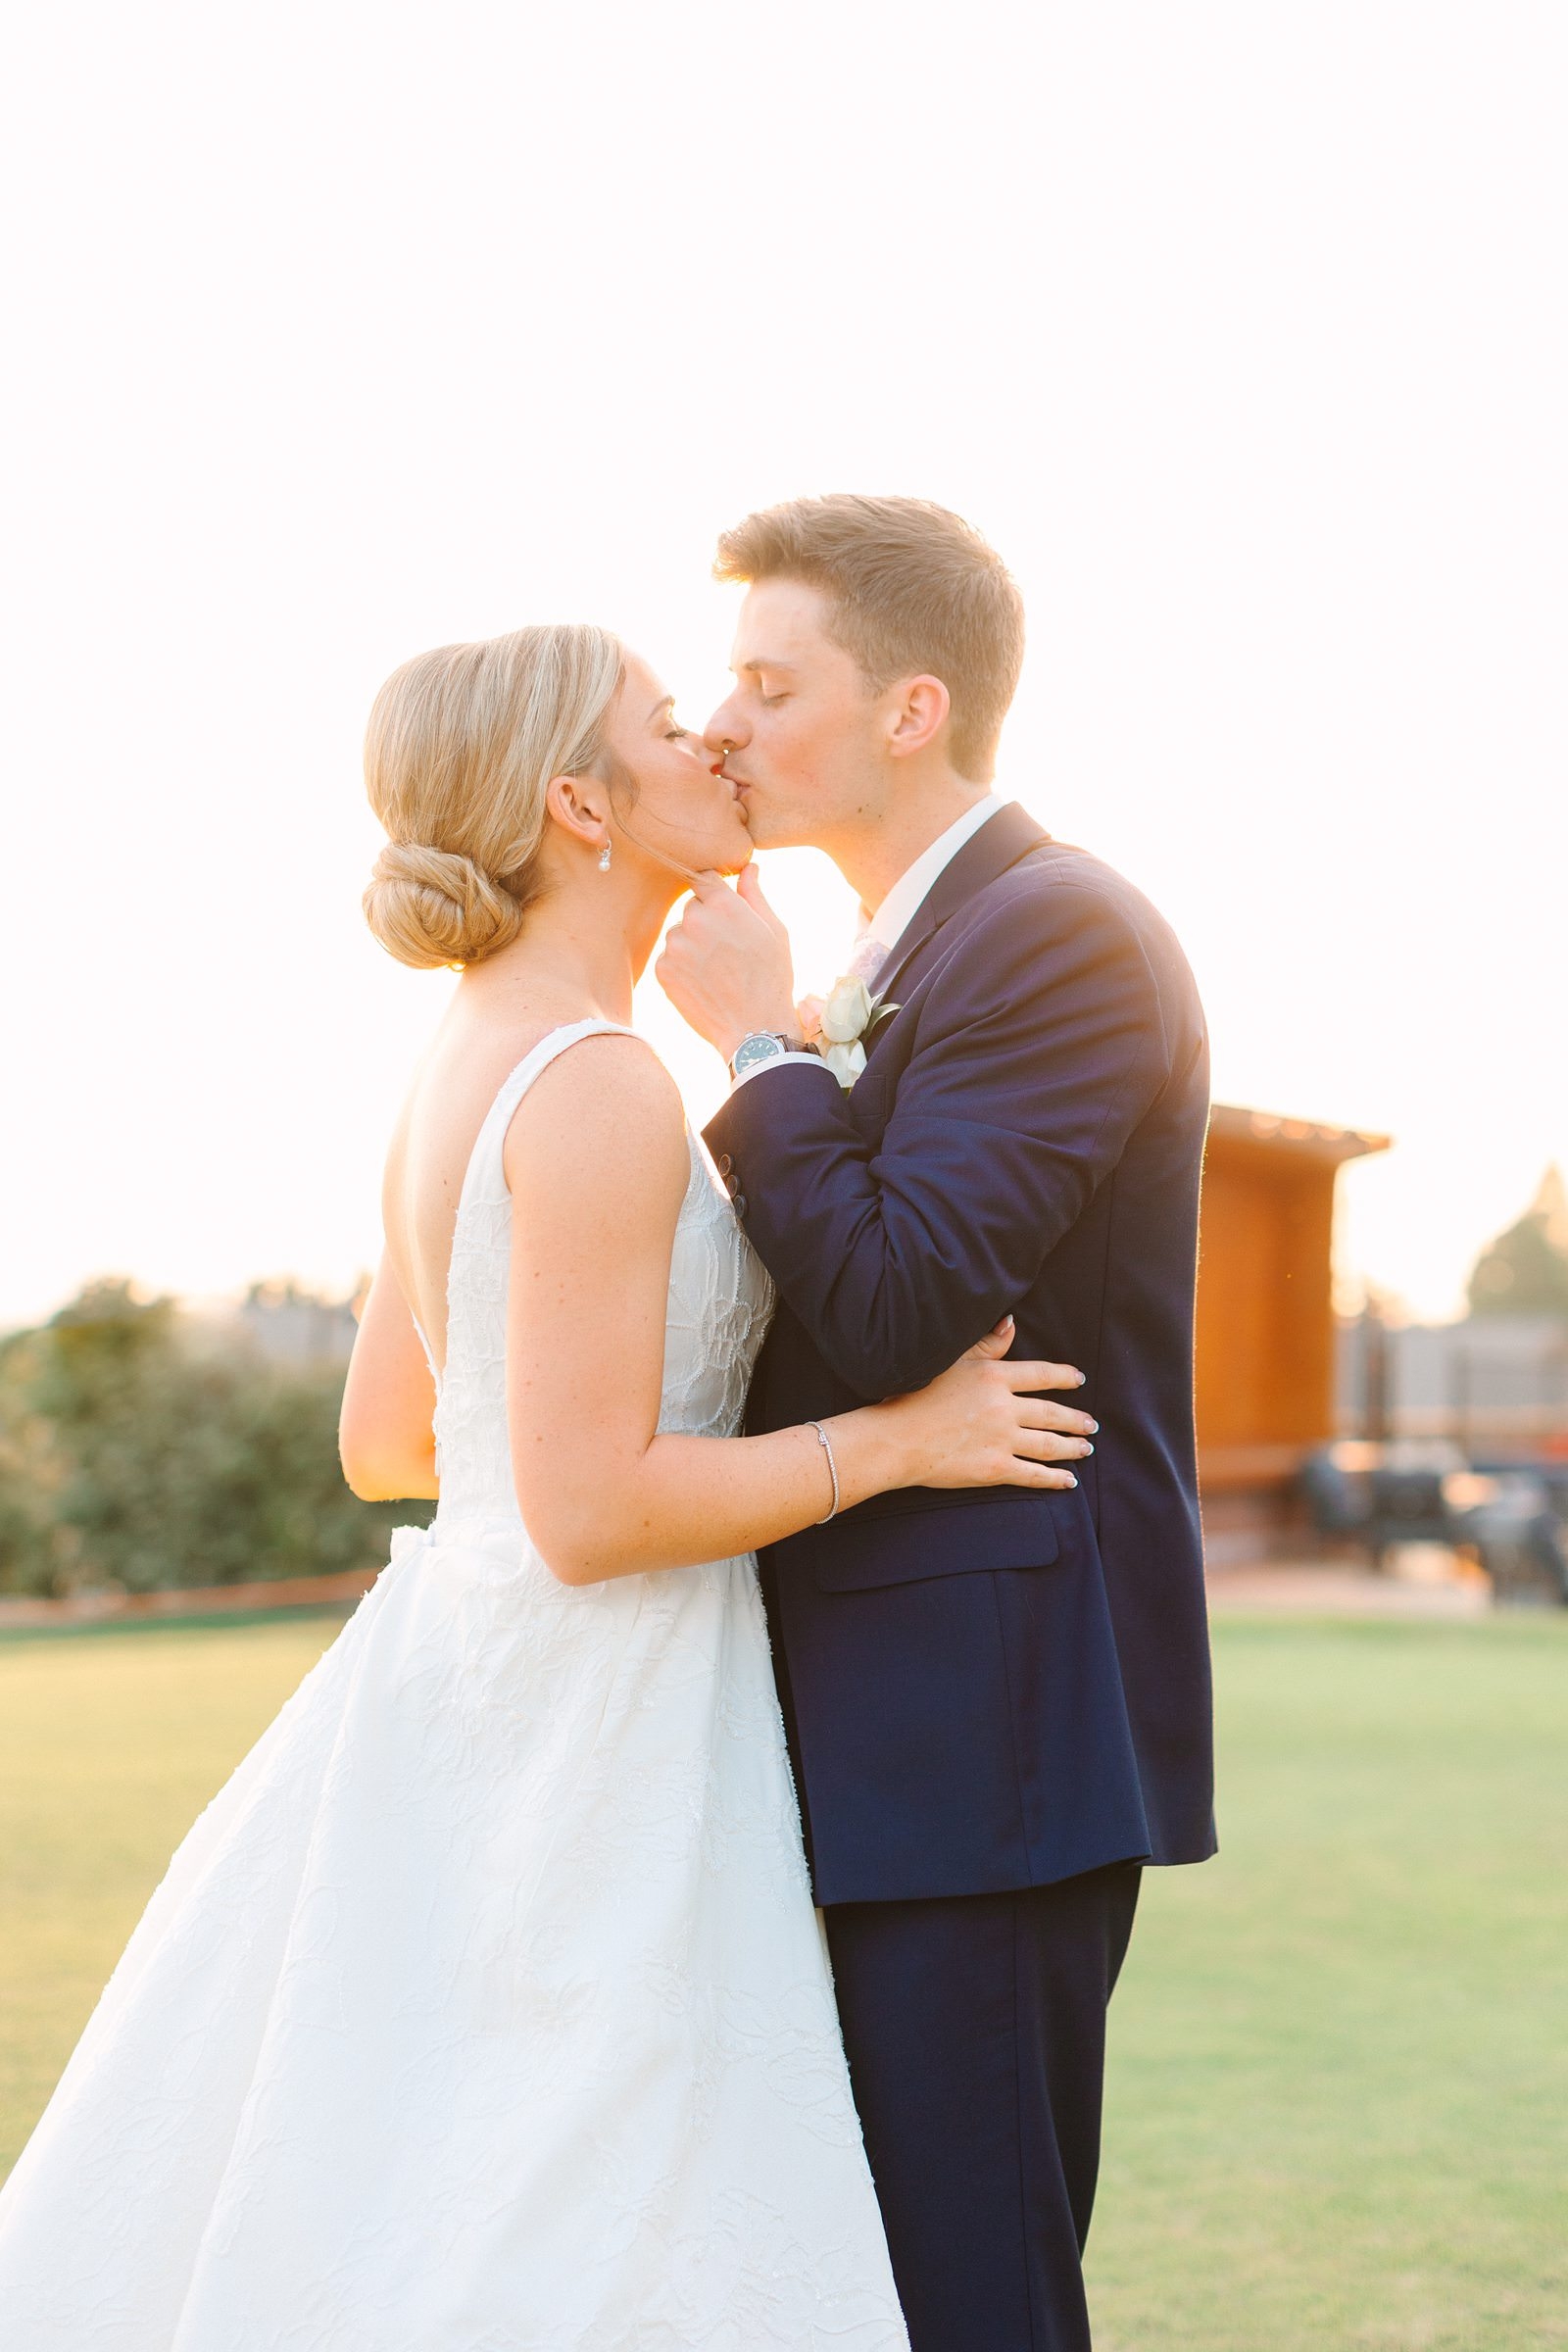 An Evansville Country Club Wedding | Ashley and Beau | Bret and Brandie Photography226.jpg